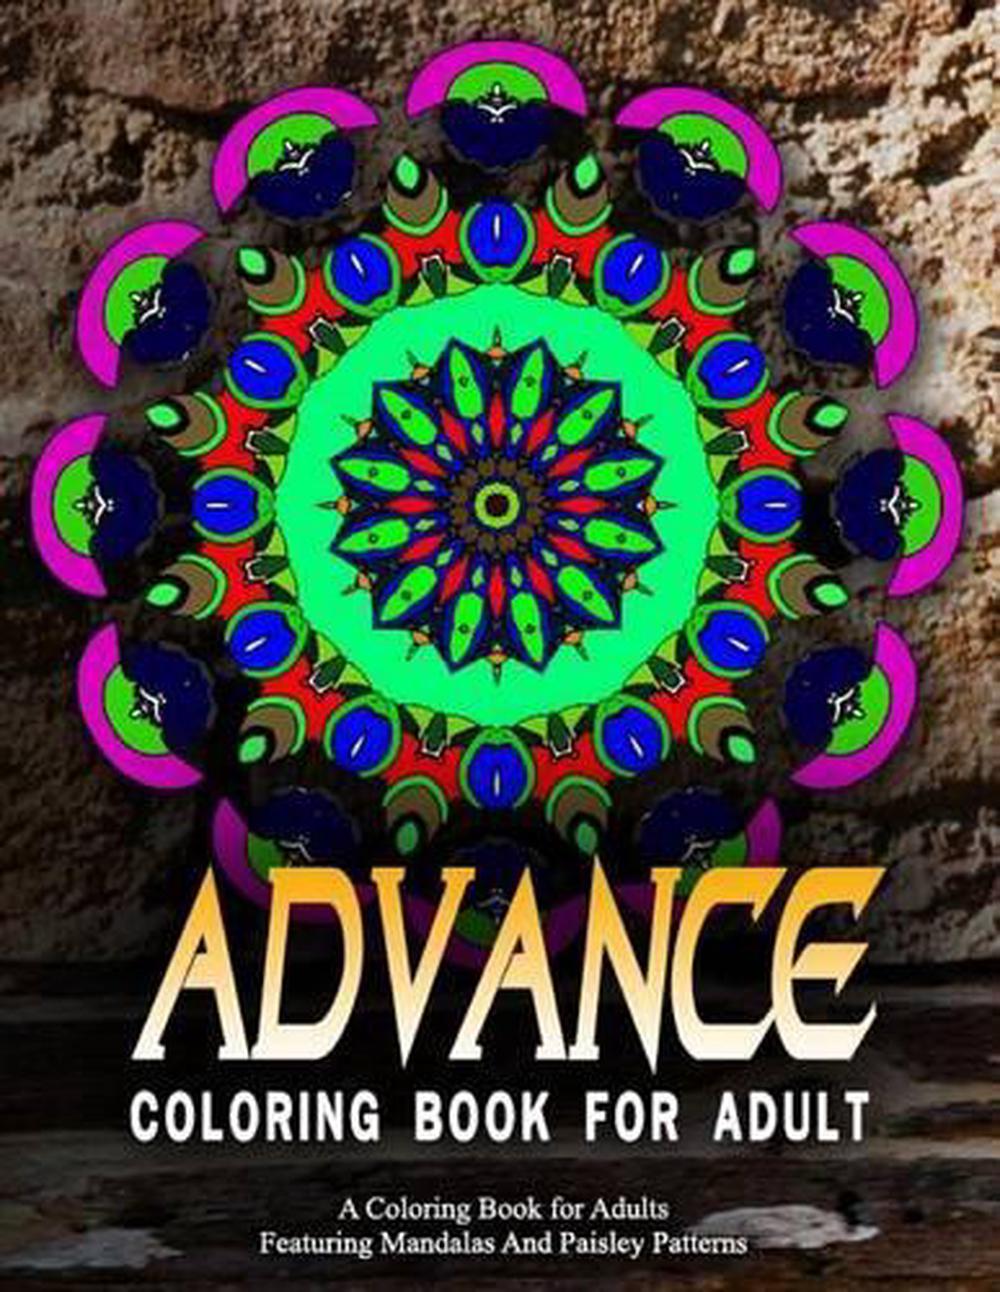 ADVANCED COLORING BOOKS FOR ADULTS Vol20 adult coloring books best
sellers for women Volume 20 Epub-Ebook